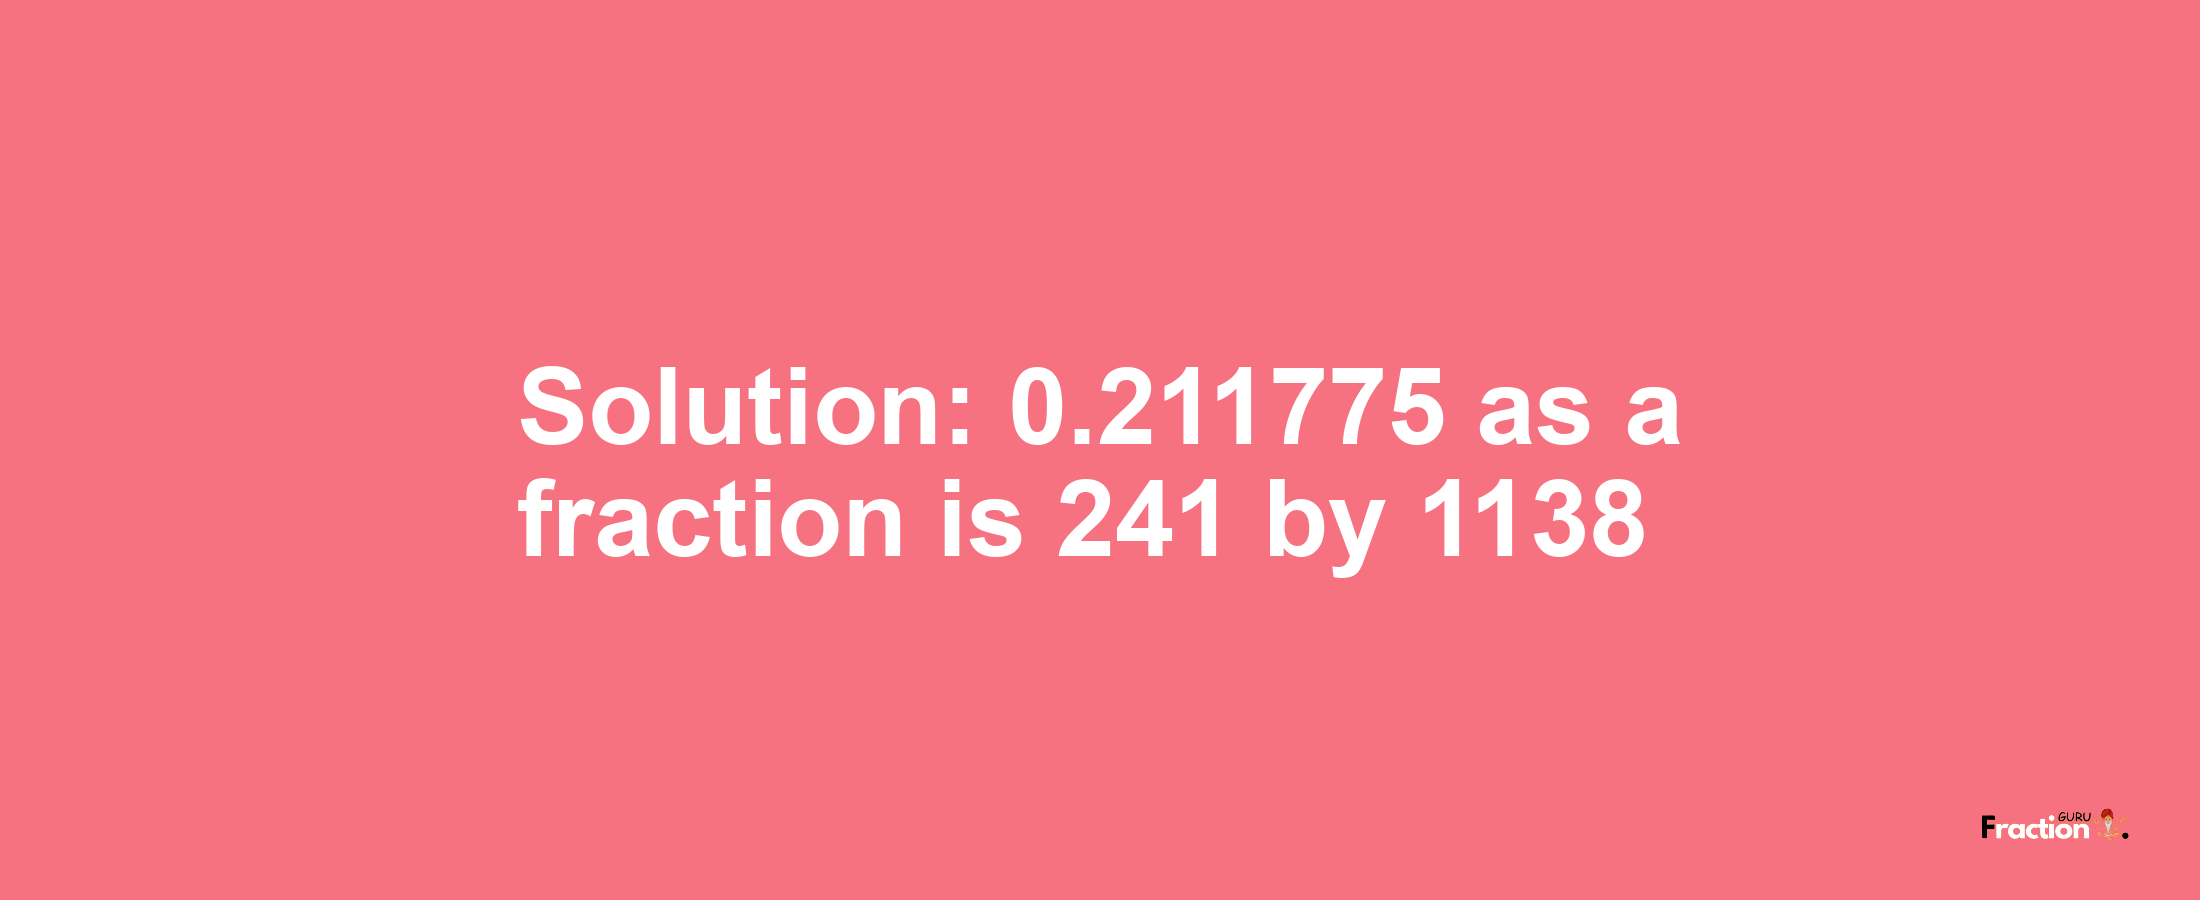 Solution:0.211775 as a fraction is 241/1138